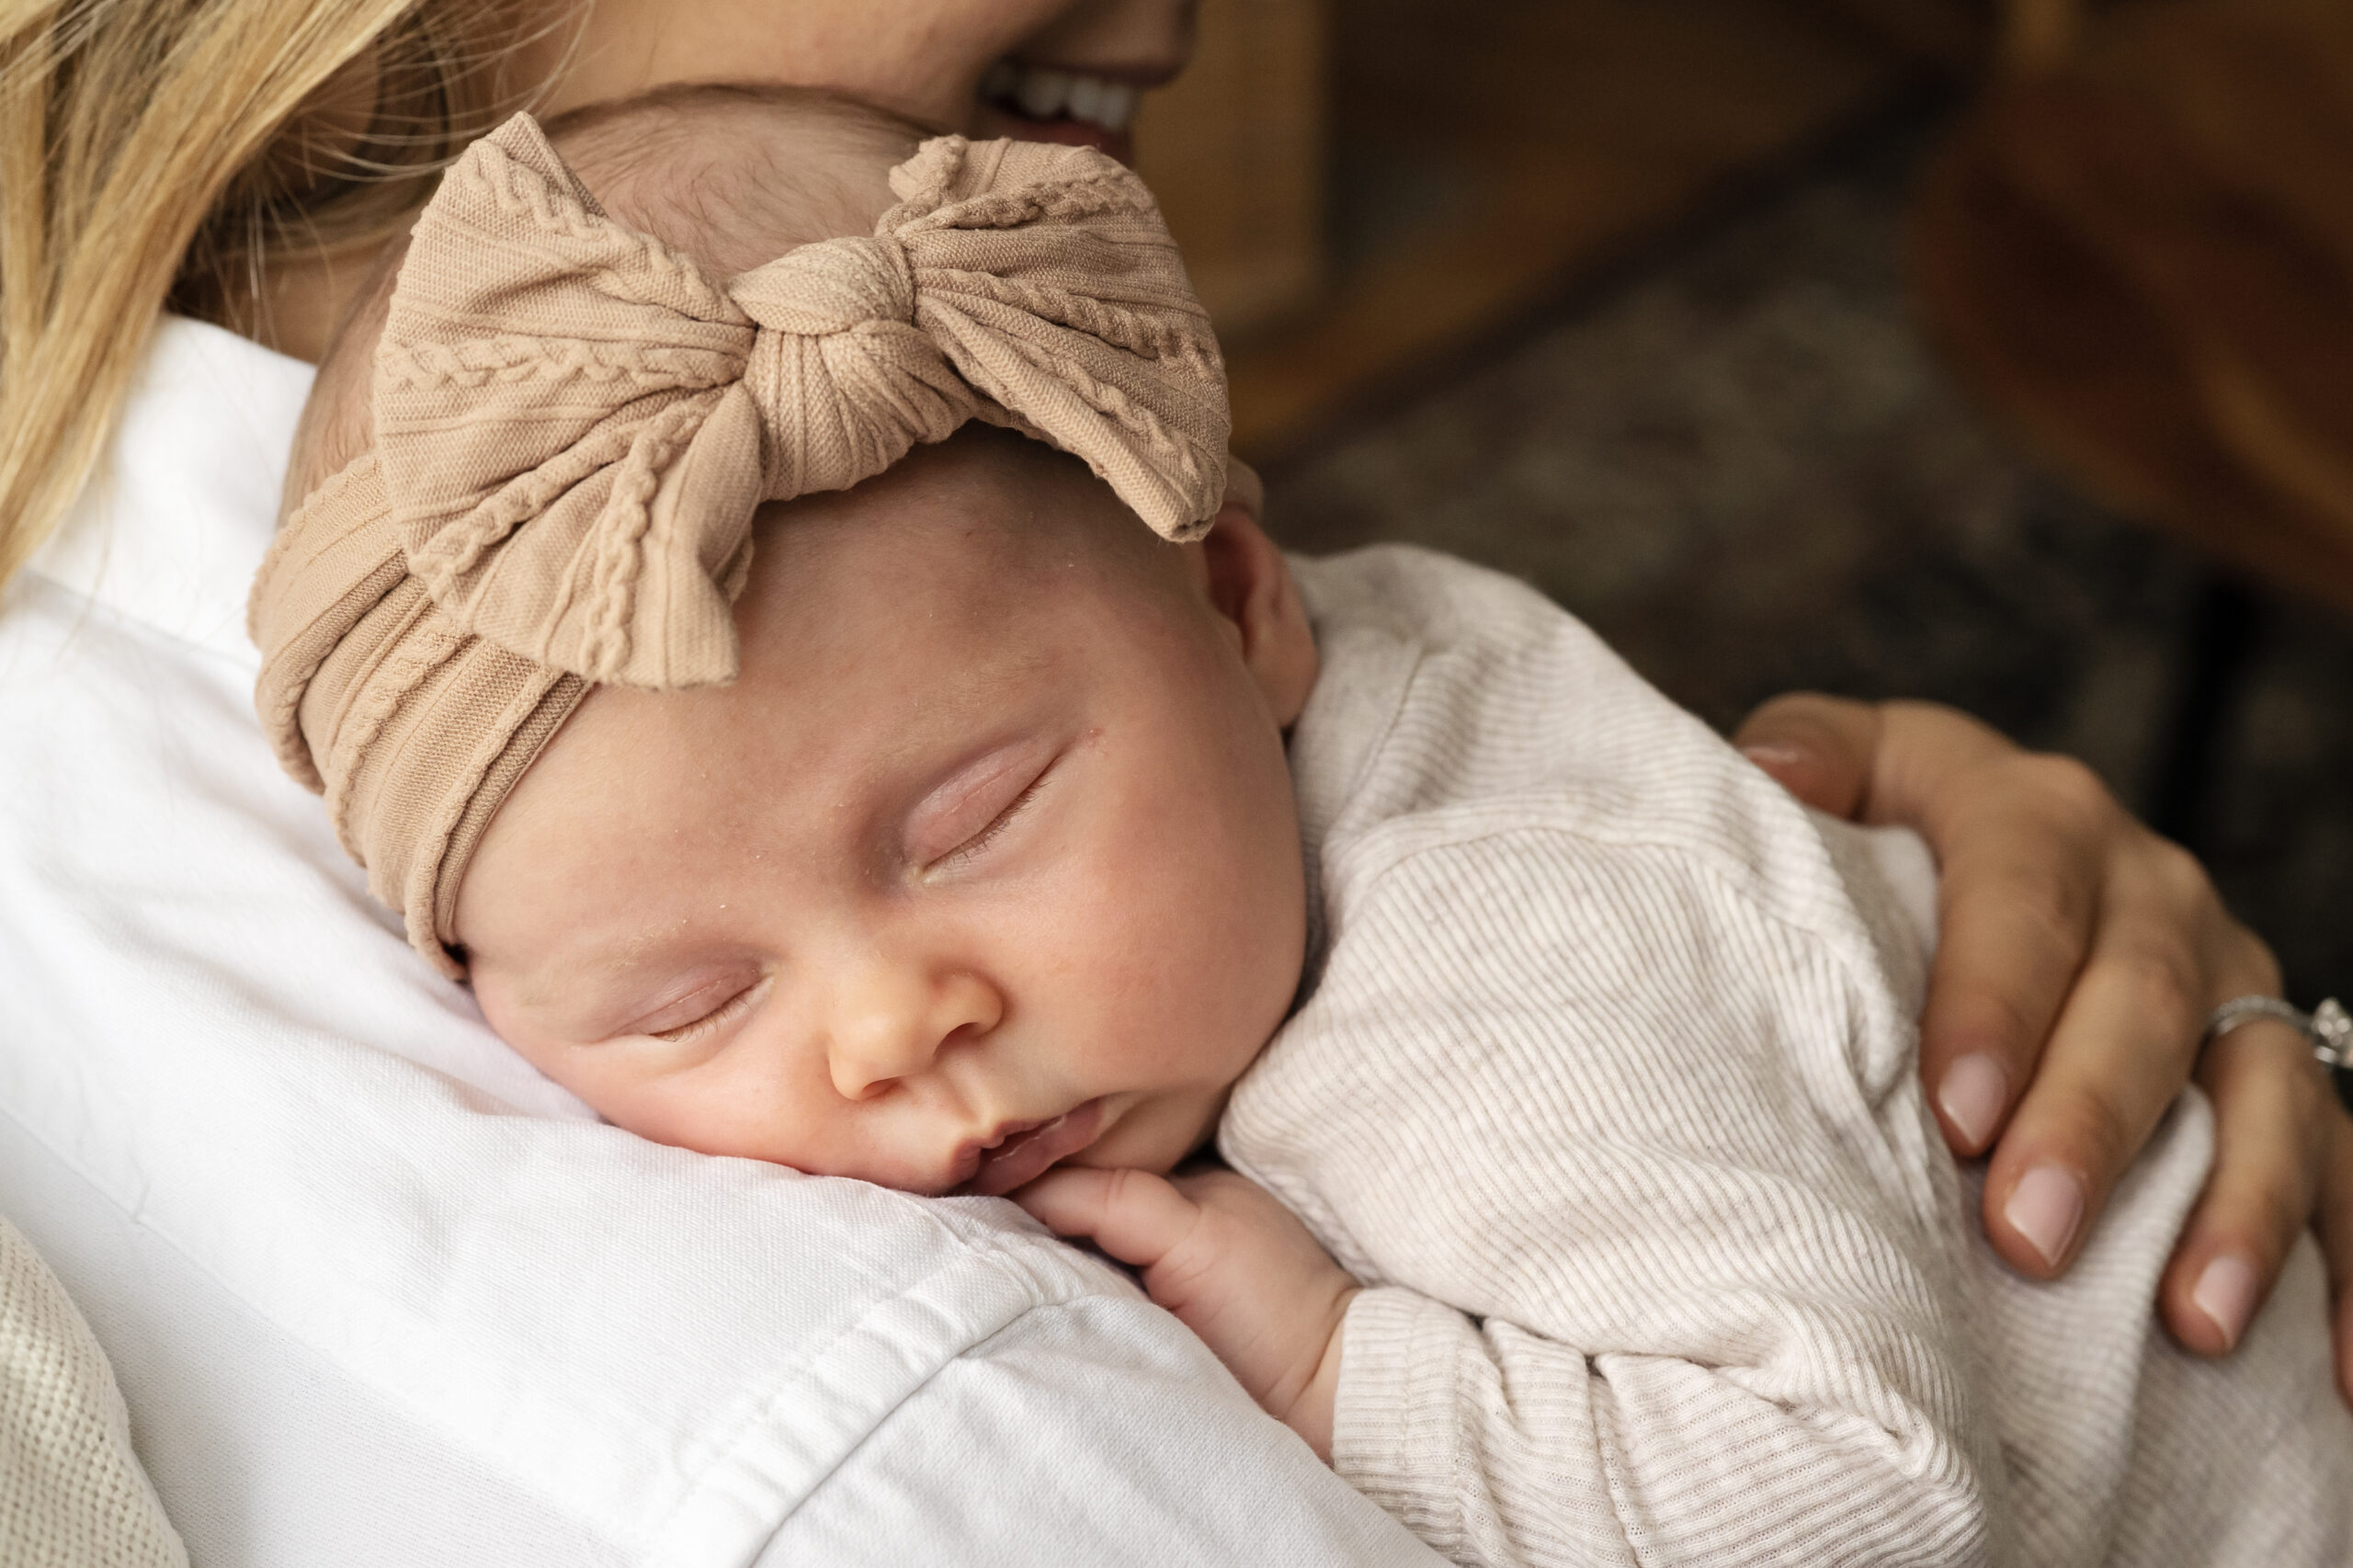 Newborn baby girl asleep on mothers shoulder during an at home newborn photo shoot in London